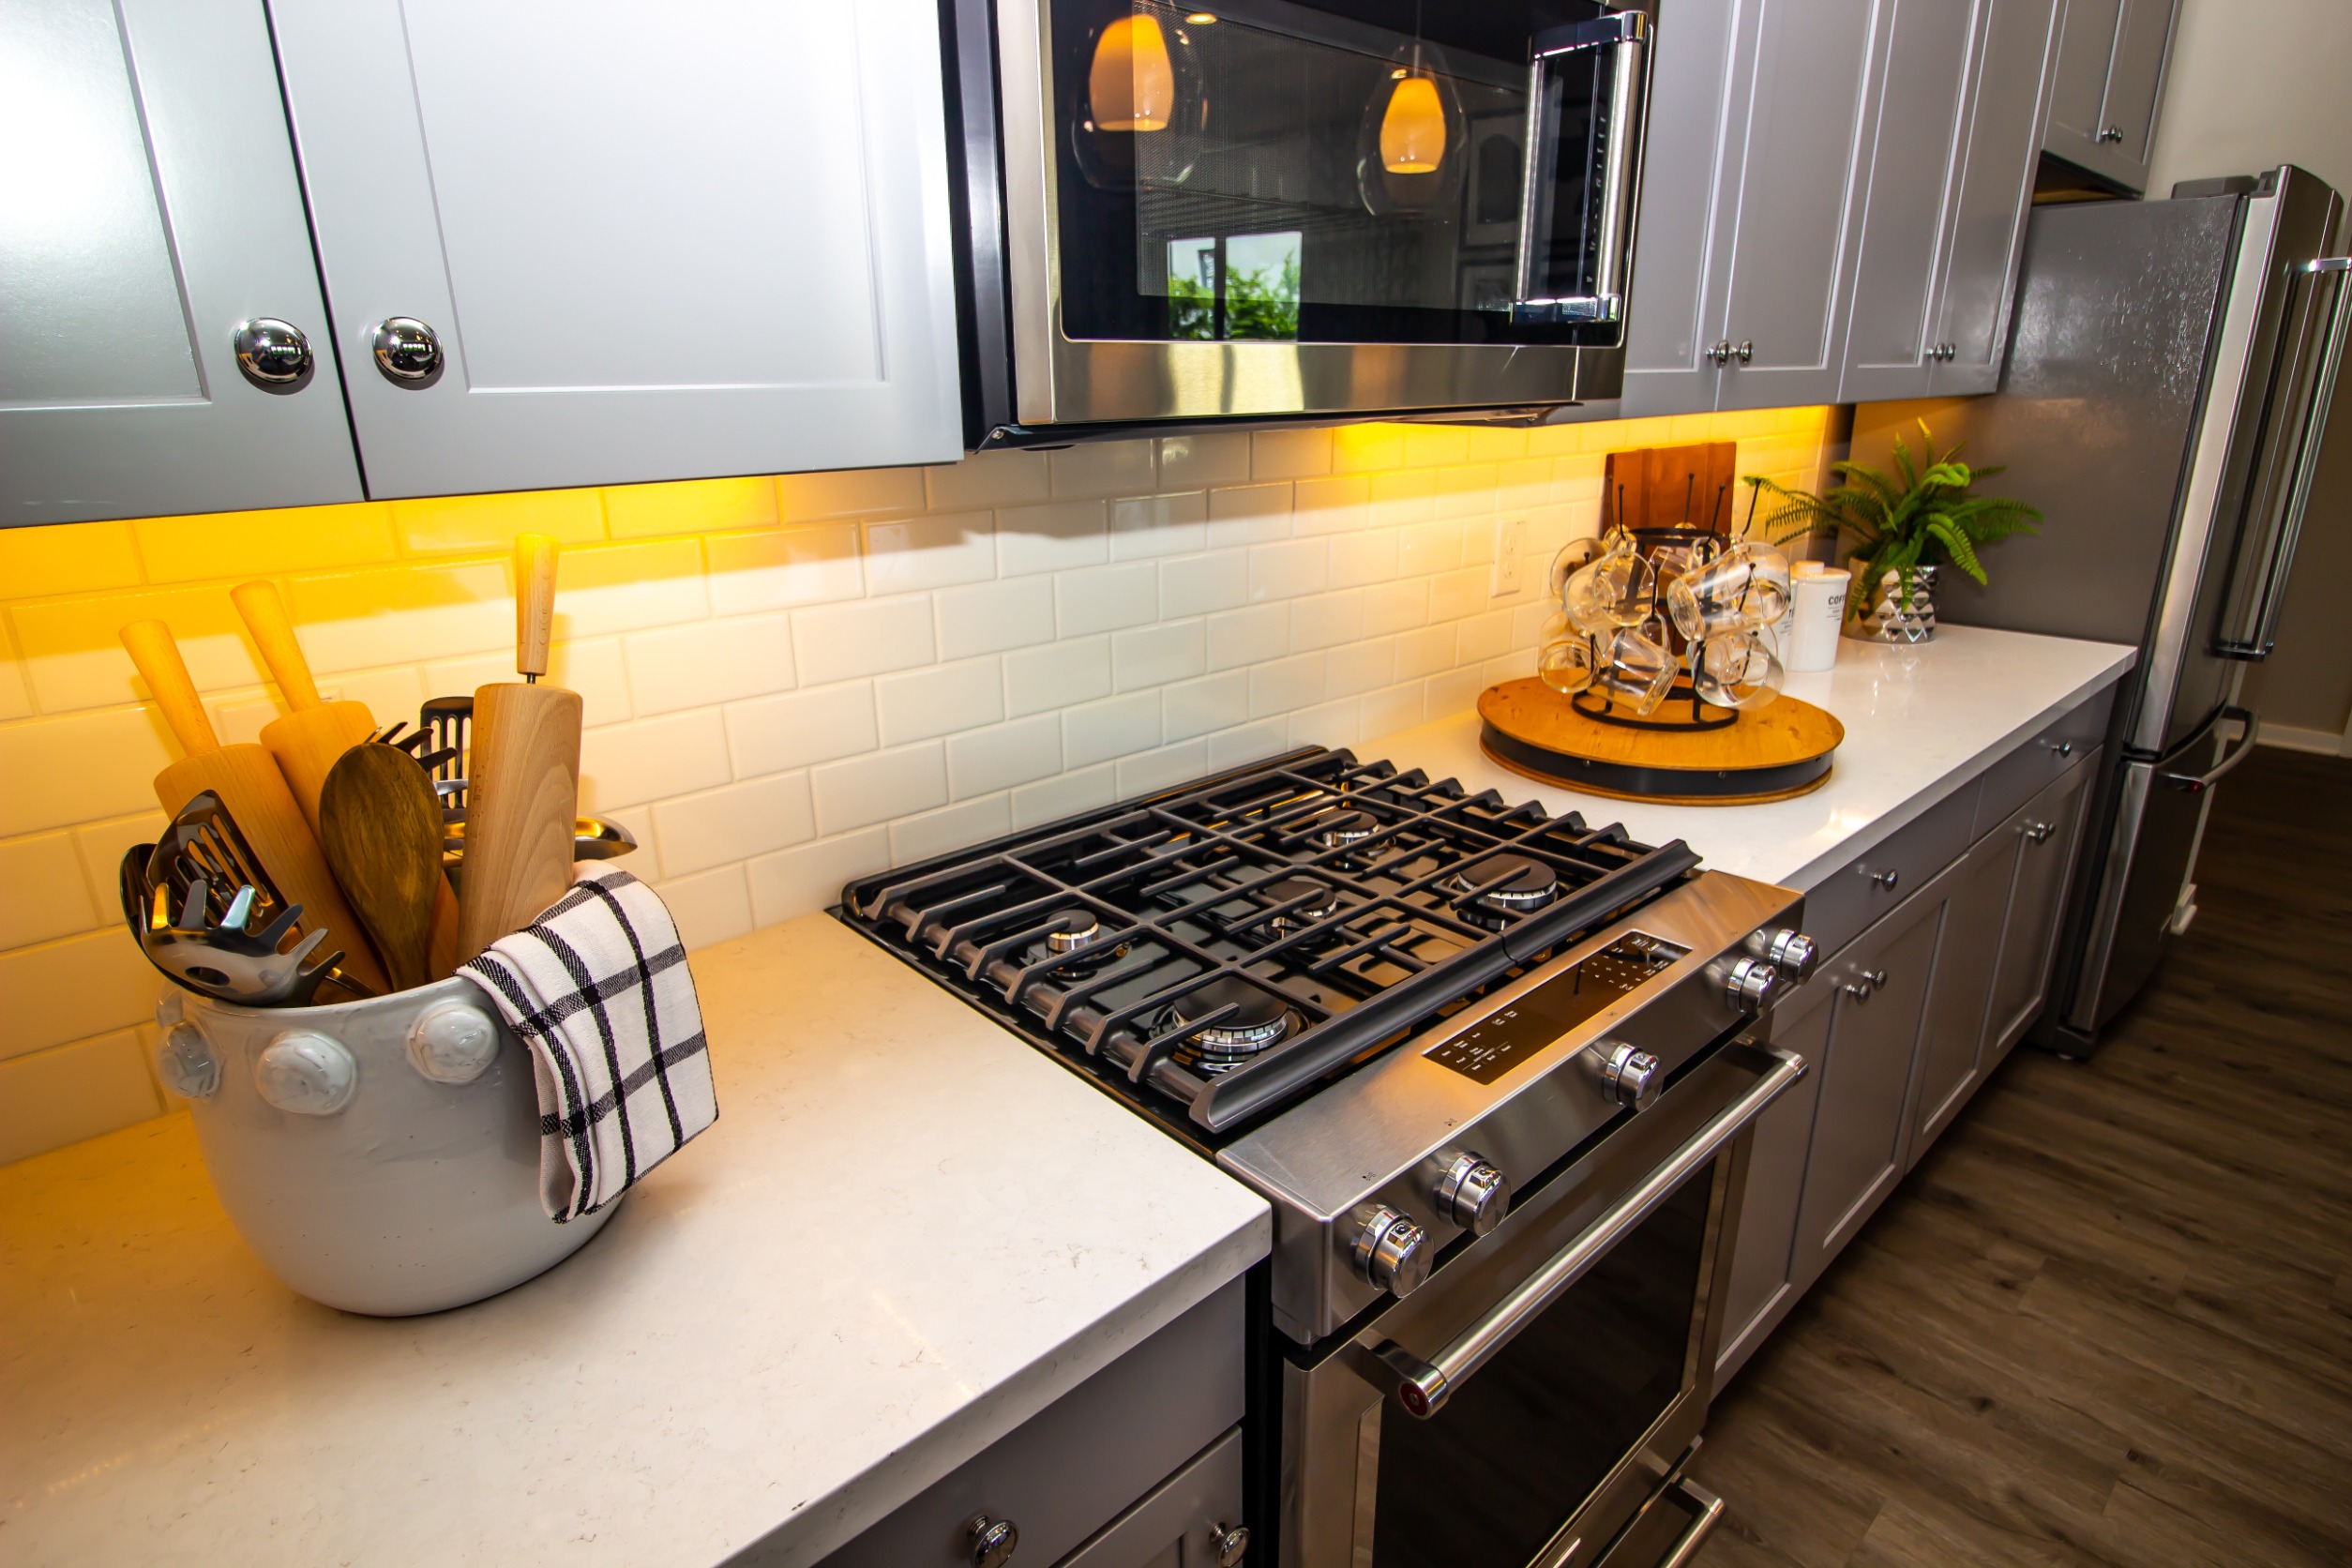 Kitchen counter with under-cabinet lighting